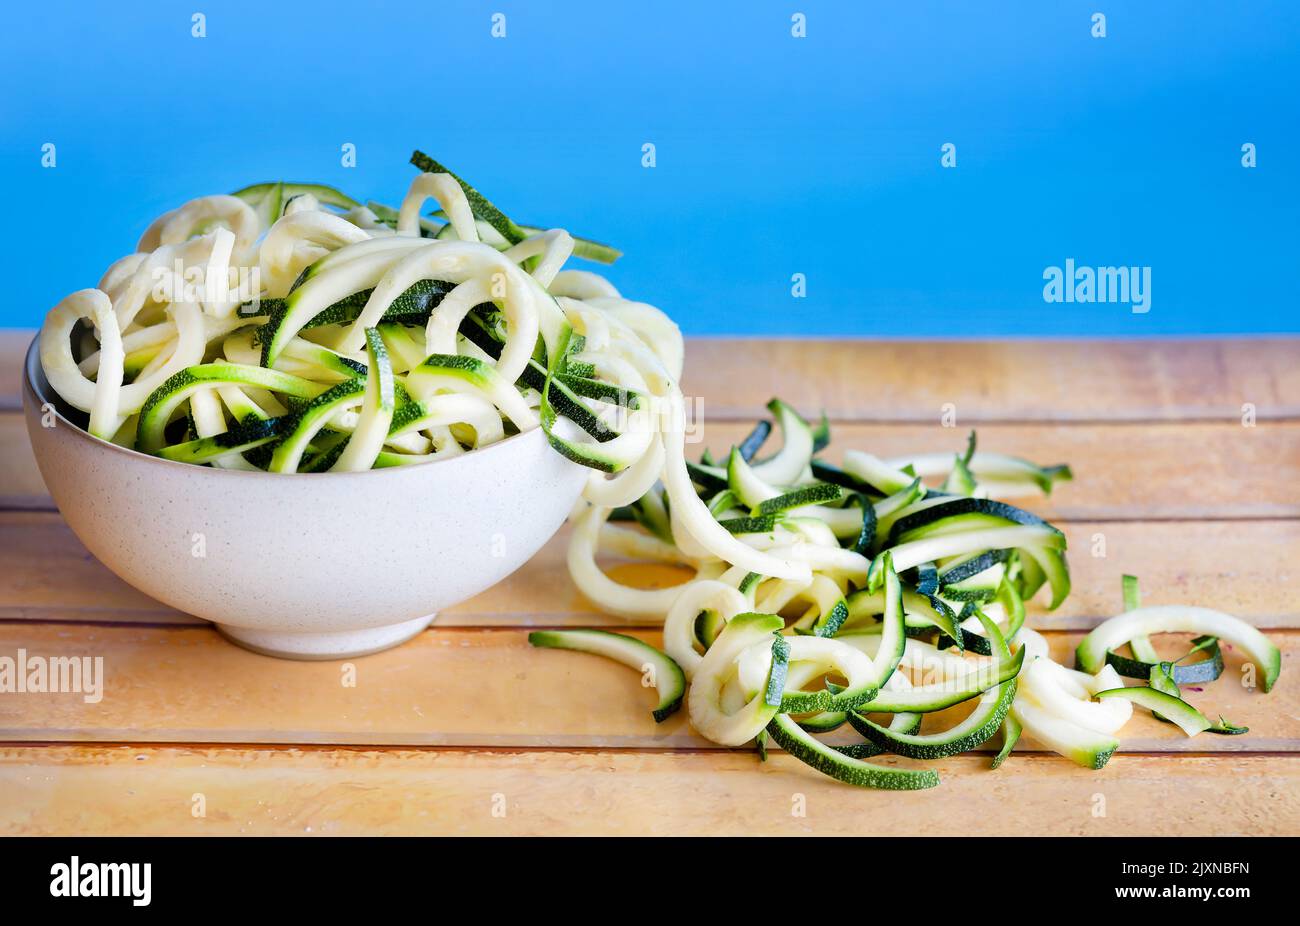 A bowl filled, and spilling over, with raw spiralized courgette or zucchini. Used as a Keto diet alternative to spaghetti and known as courgetti Stock Photo